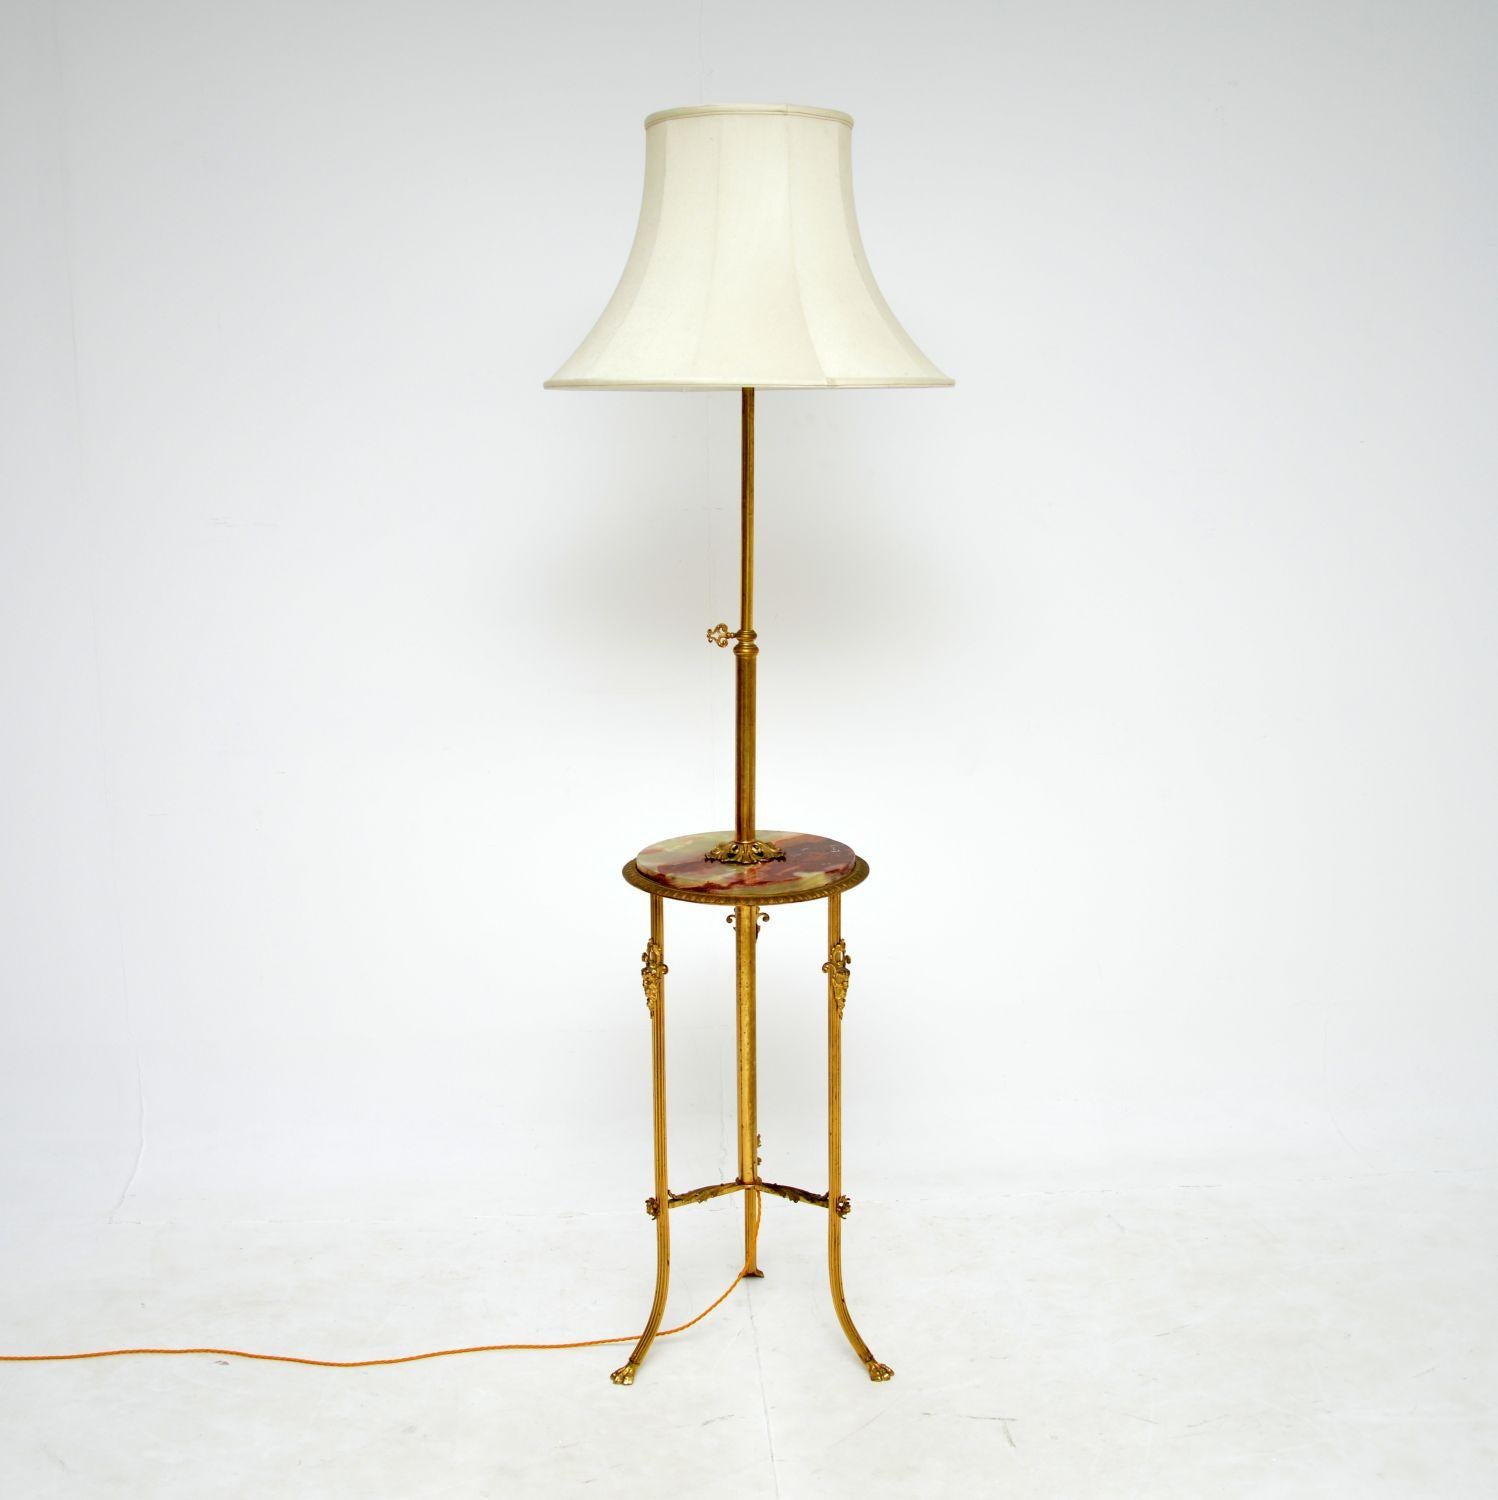 A beautiful and extremely well made antique floor lamp with a built in table. This was made in France, it dates from around the 1920’s.

The quality is superb, the brass has amazing details, and the lamp has a rise and fall mechanism. The table